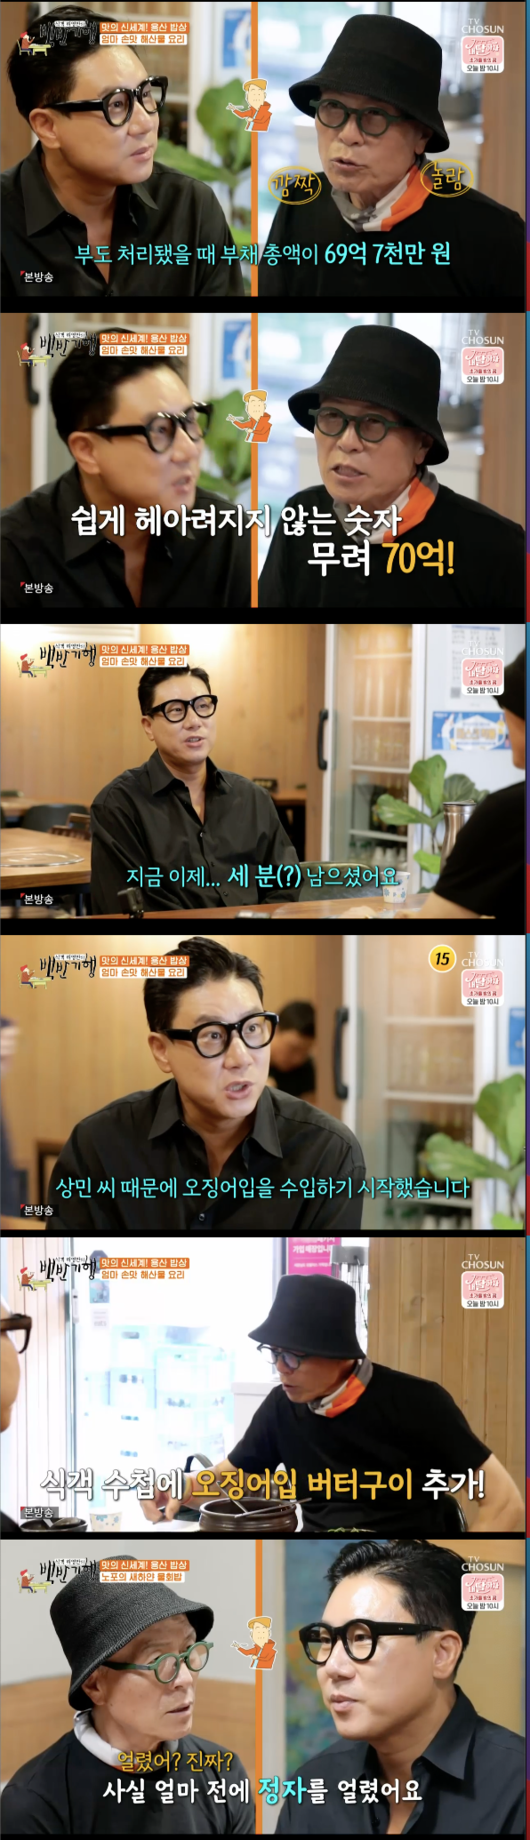 Lee Sang-min, a white-half-time, has been honest about the current situation.Singer Lee Sang-min appeared on the TV Chosun Huh Young Mans Food Travel broadcast on the 3rd, and Huh Young-man and Yongsan enjoyed food.They found a grilled house. Huh Young-man said it was a little far from lamb. Its too greasy to eat often, he said.Lee Sang-min said of his hobby, There are a lot of clothes and shoes. There are about 400 pairs of shoes.Huh Young-man was surprised and asked, How many million won is there?Lee Sang-min showed the shoes that he reported and said, This time was 200,000 won when I lived, but now it is 1 million won.Huh Young-man said after tasting the grilled legs, I do not have a unique catch.I was tired of eating too much lamb when I painted a cartoon related to Chingiz Khan, but this is delicious.The sheep are more than 12 months old, and they have a lot of fun, explained Lee Sang-min, who explained the secret to the taste.I knew today that I had to eat a grilled leg to taste the real lamb. The remaining bones and flesh boiled Malatang. Huh Young-man first tried Malatang.Lee Sang-min admired the Malatang visual with the cucumber, and praised it as the best Malatang I have ever eaten.At the words of Lee Sang-min, Huh Young-man tasted Malatang and coughed and laughed at the spicy taste.The two legs are in Malatang and its cooler and more delicious, Lee Sang-min said.When I see Lee Sang-min, I think of a saying: first class laughers, second class bearers, third class cryers.Youre a first-class person like Lee Sang-min, he said. How many years have you owed that?Lee Sang-min said, In 2005, the total amount of debt was 6.97 billion won.Huh Young-man asked, Have you almost paid it off? Lee Sang-min replied, There are still three minutes left to pay the debt.Huh Young-man then asked, What do you like to eat? Lee Sang-min said, Nothing is hidden. When many people were not interested, they bought and ate squid.When it was 5,000 won for 1kg, it can not be so delicious in the world if you bake it in a single-spot butter. After I went on the air, I heard from the squid seller, who said, I started importing squid, he said.Huh Young-man even wrote a note saying, It would be delicious to listen.Meanwhile, Lee Sang-min confessed to the fact of sperm freezing and surprised Huh Young-man.TV Chosun Huh Young Mans Food Travel broadcast screen capture